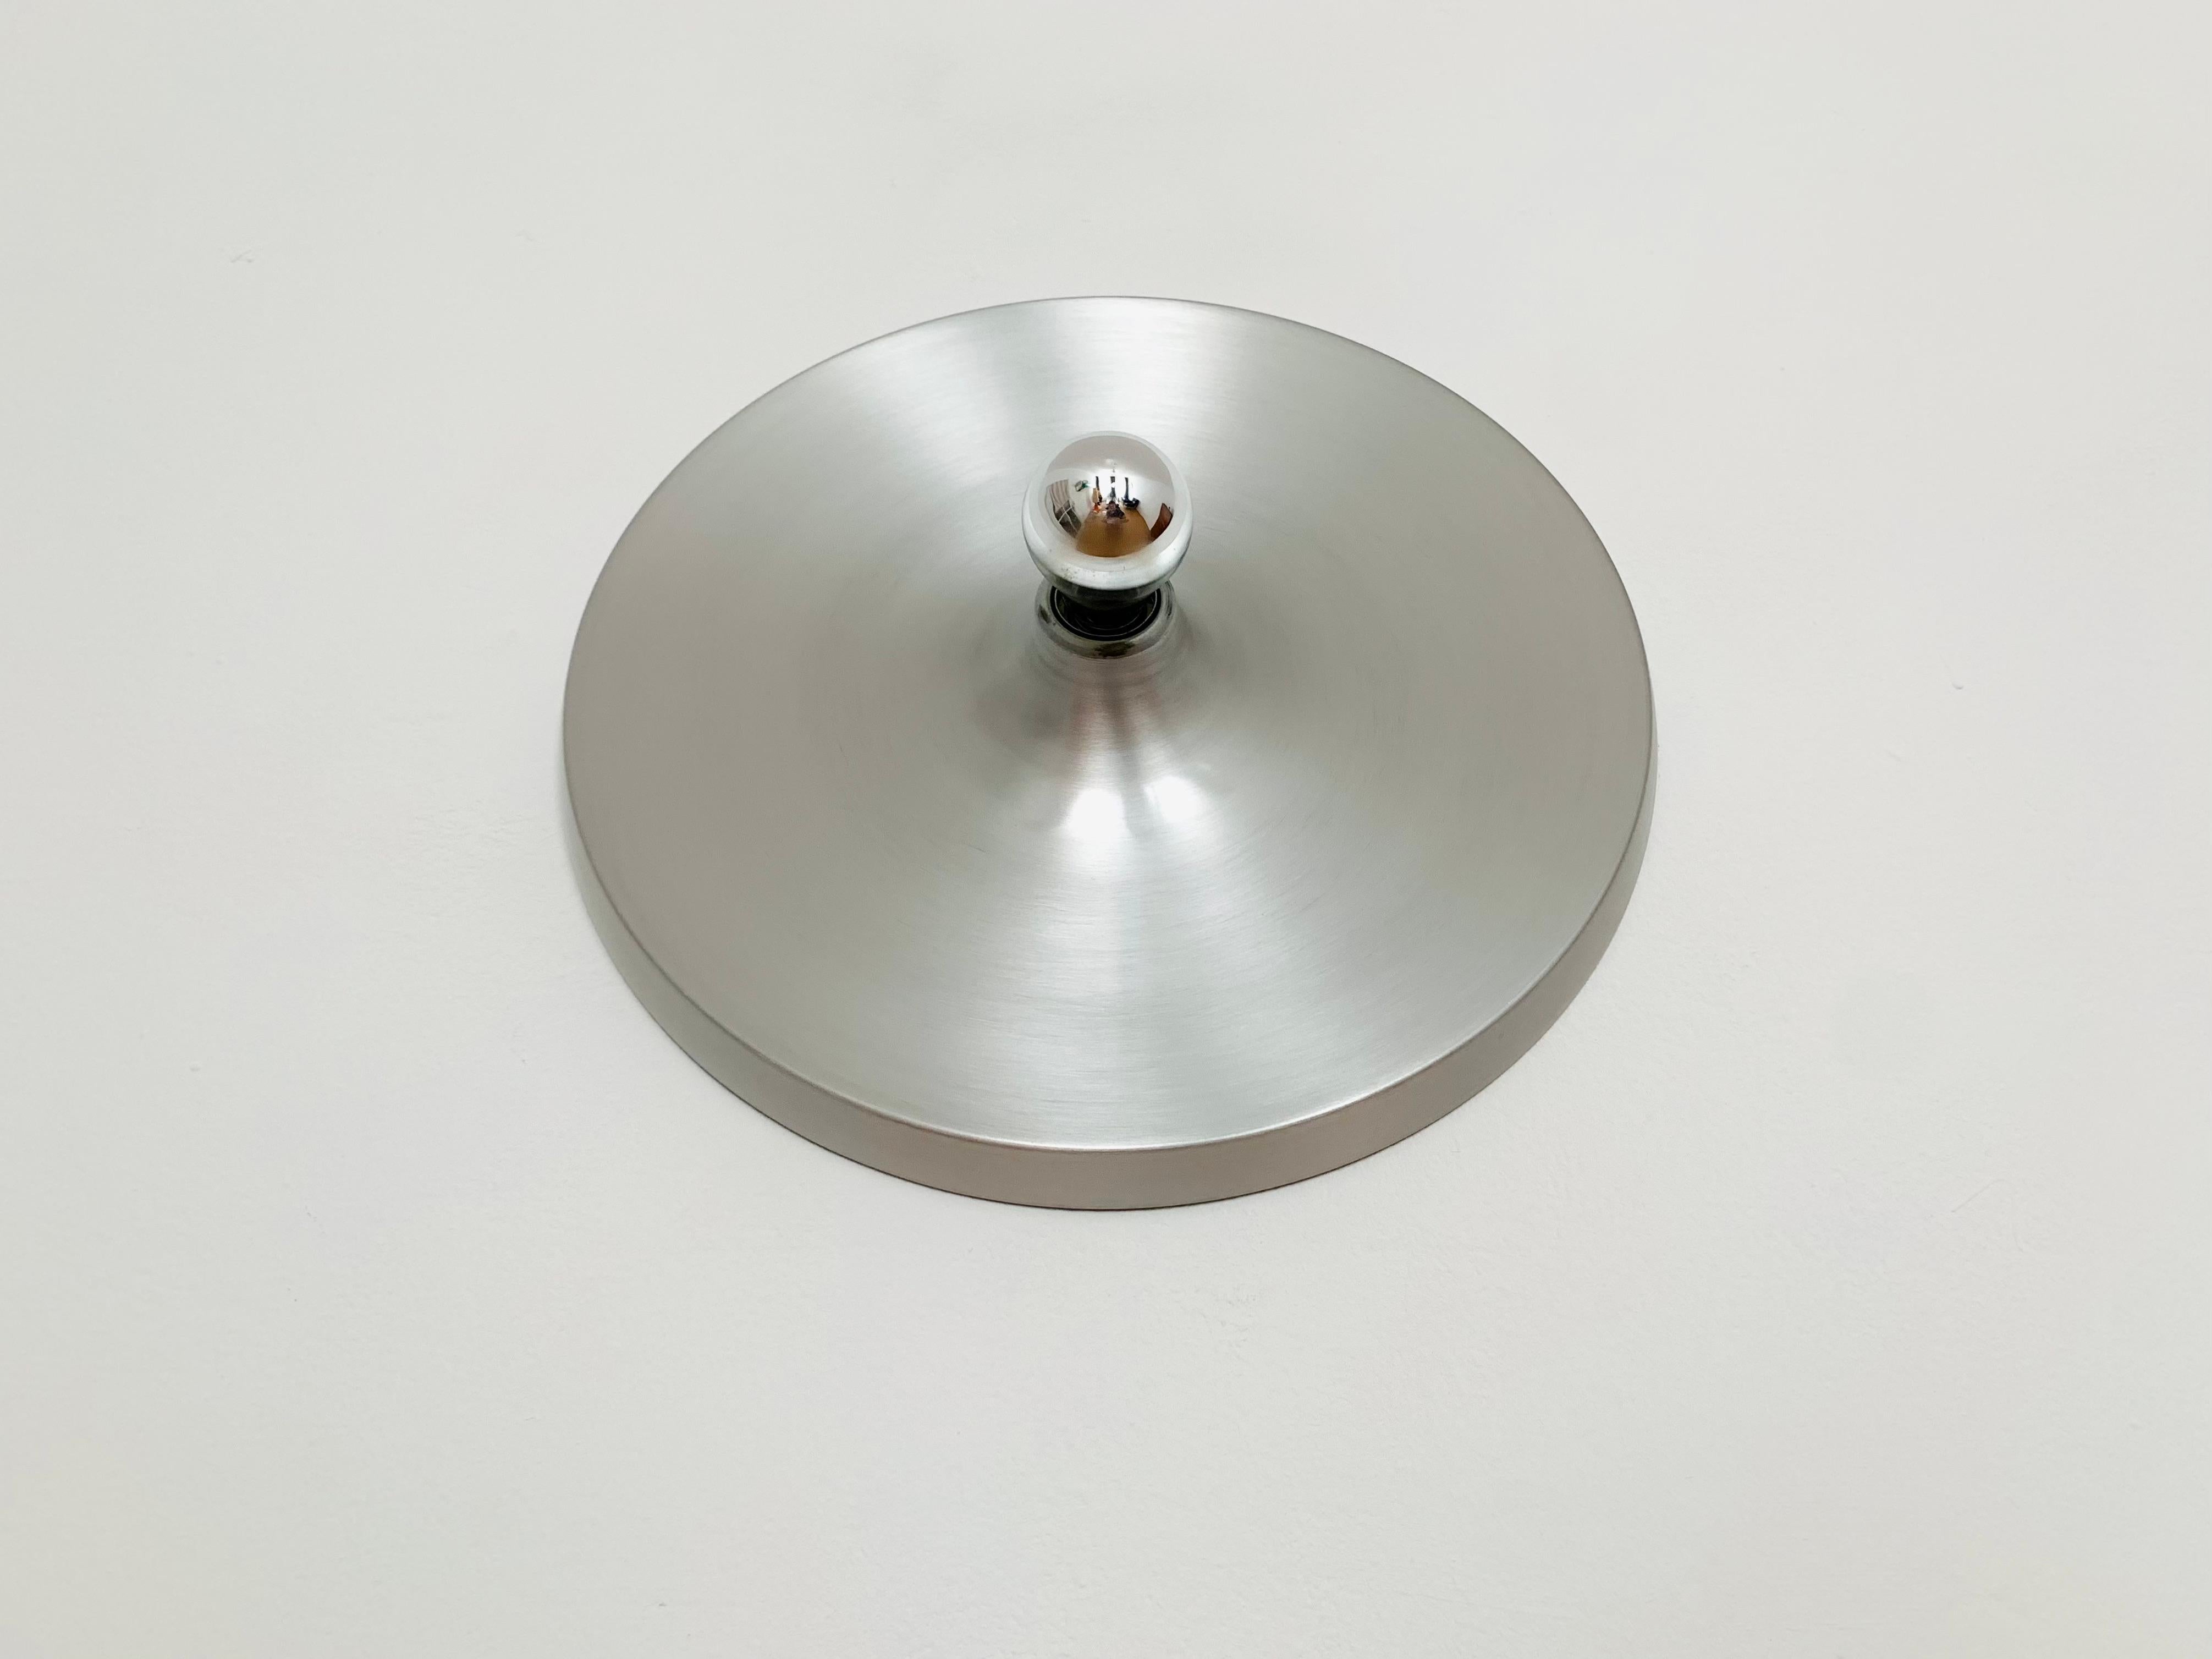 Very nice wall or ceiling lamp from the 1970s.
Nice reduced design.
Very high quality processing.

Condition:

Very good vintage condition with slight signs of wear consistent with age.
Minimal signs of use.

The pictures are part of the